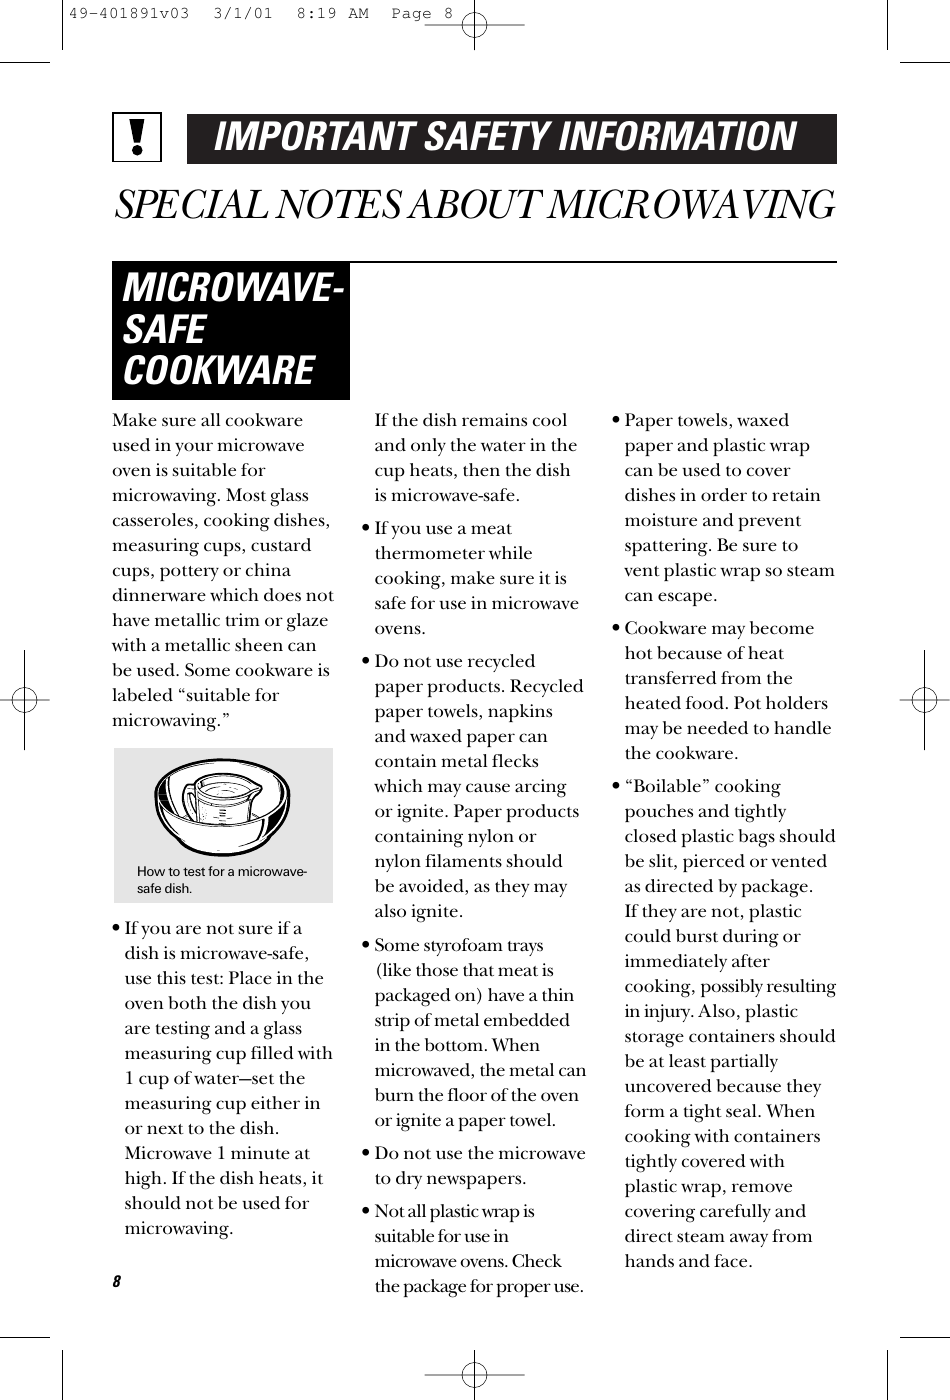 IMPORTANT SAFETY INFORMATIONSPECIAL NOTES ABOUT MICROWAVINGMake sure all cookwareused in your microwaveoven is suitable formicrowaving. Most glasscasseroles, cooking dishes,measuring cups, custardcups, pottery or chinadinnerware which does nothave metallic trim or glazewith a metallic sheen canbe used. Some cookware islabeled “suitable formicrowaving.”•If you are not sure if adish is microwave-safe,use this test: Place in theoven both the dish youare testing and a glassmeasuring cup filled with1 cup of water—set themeasuring cup either inor next to the dish.Microwave 1 minute athigh. If the dish heats, itshould not be used formicrowaving. If the dish remains cooland only the water in thecup heats, then the dishis microwave-safe.•If you use a meat thermometer whilecooking, make sure it issafe for use in microwaveovens.•Do not use recycledpaper products. Recycledpaper towels, napkinsand waxed paper cancontain metal fleckswhich may cause arcingor ignite. Paper productscontaining nylon ornylon filaments shouldbe avoided, as they mayalso ignite. •Some styrofoam trays (like those that meat ispackaged on) have a thinstrip of metal embeddedin the bottom. Whenmicrowaved, the metal canburn the floor of the ovenor ignite a paper towel.•Do not use the microwaveto dry newspapers.•Not all plastic wrap issuitable for use inmicrowave ovens. Checkthe package for proper use.•Paper towels, waxedpaper and plastic wrapcan be used to coverdishes in order to retainmoisture and preventspattering. Be sure tovent plastic wrap so steamcan escape.•Cookware may becomehot because of heattransferred from theheated food. Pot holdersmay be needed to handlethe cookware.•“Boilable” cookingpouches and tightlyclosed plastic bags shouldbe slit, pierced or ventedas directed by package. If they are not, plasticcould burst during orimmediately aftercooking, possibly resultingin injury. Also, plasticstorage containers shouldbe at least partiallyuncovered because theyform a tight seal. Whencooking with containerstightly covered withplastic wrap, removecovering carefully anddirect steam away fromhands and face.MICROWAVE-SAFECOOKWARE8How to test for a microwave-safe dish.49-401891v03  3/1/01  8:19 AM  Page 8